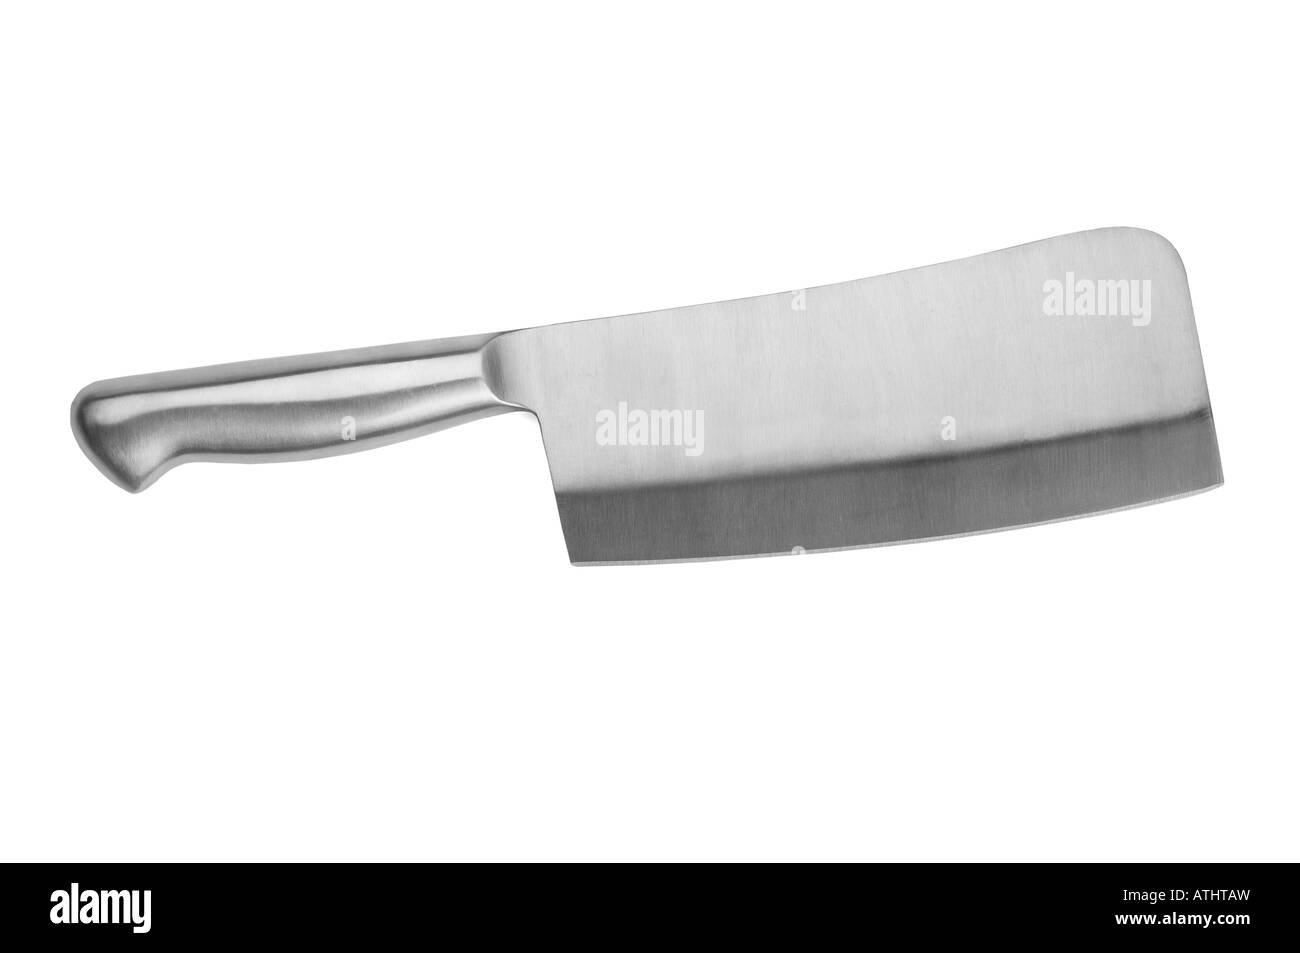 https://c8.alamy.com/comp/ATHTAW/meat-cleaver-ATHTAW.jpg